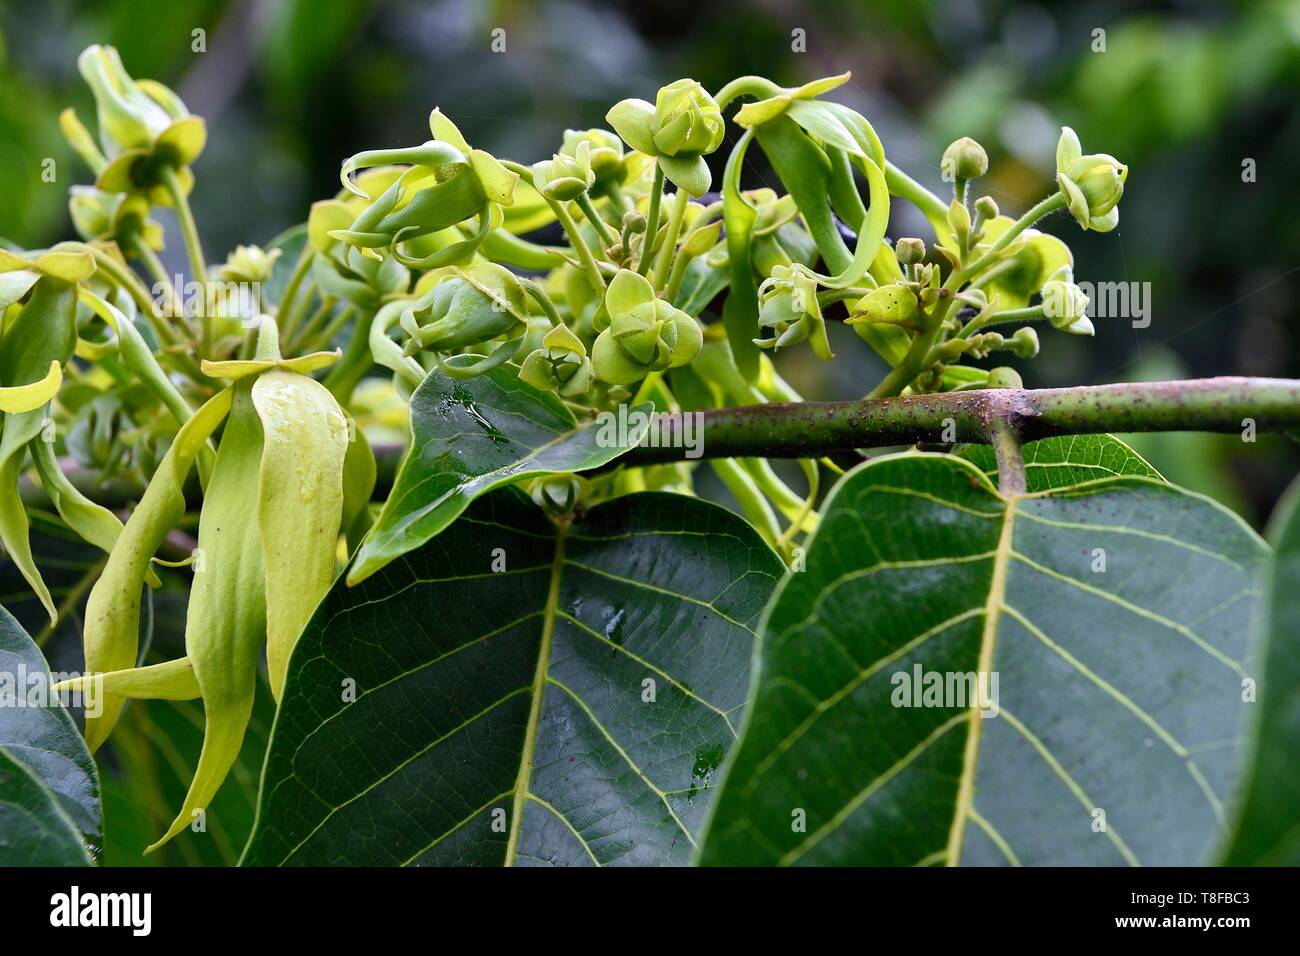 France, Mayotte island (French overseas department), Grande Terre, Ouangani, ylang ylang (Cananga odorata) flowers on the tree Stock Photo